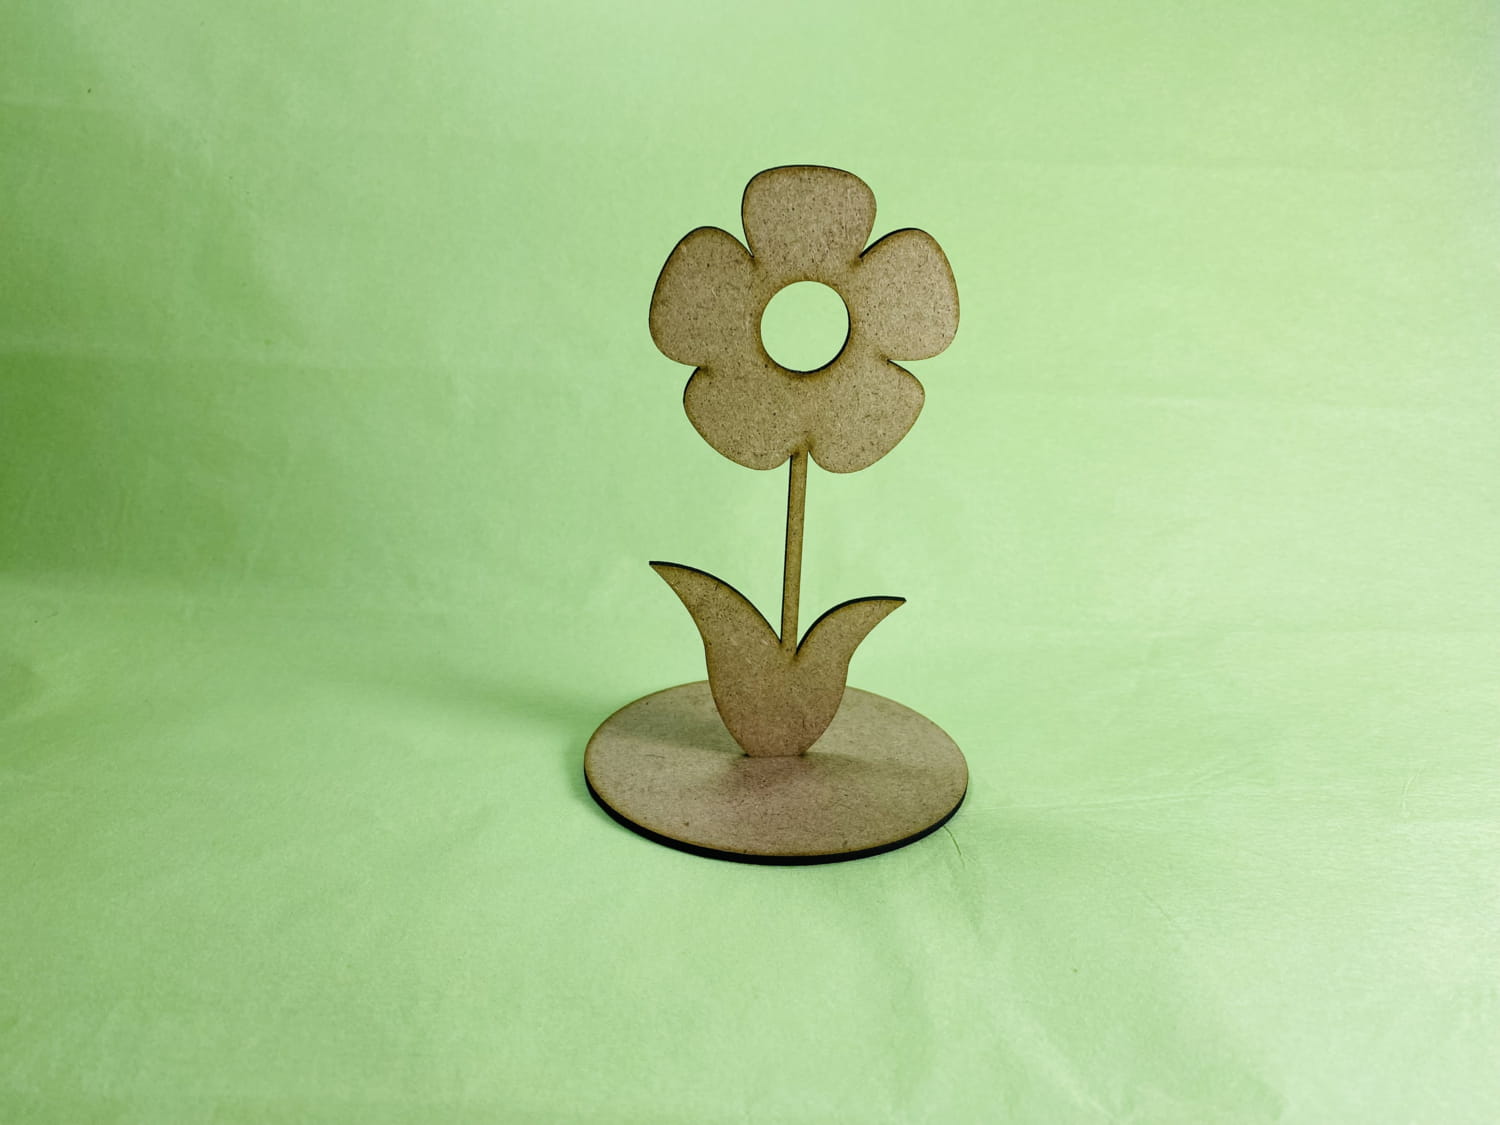 Laser Cut Flower With Stand Free Vector